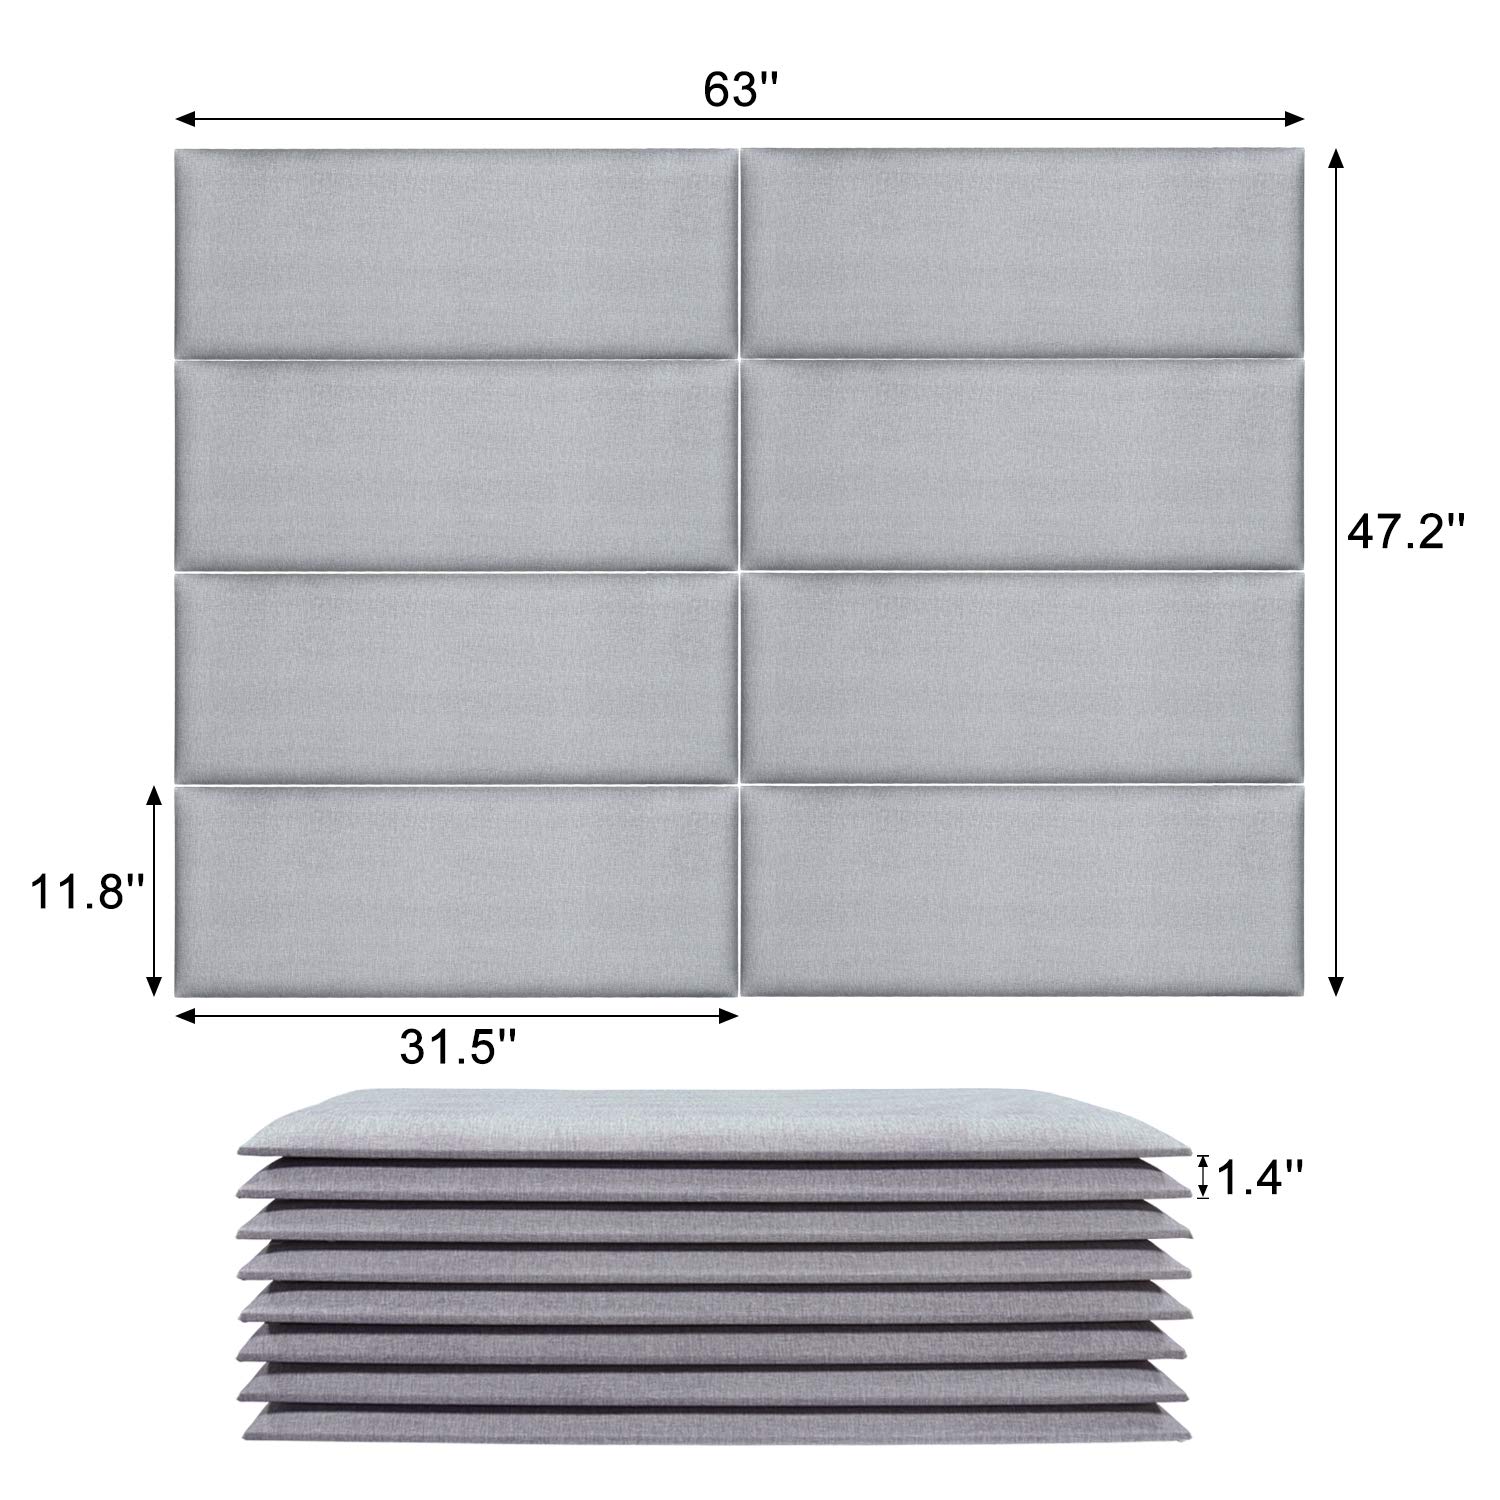 Upholstered Headboard Queen - Set of 8 panels Removable Accent Leather Wall Panels - Gray 31.5